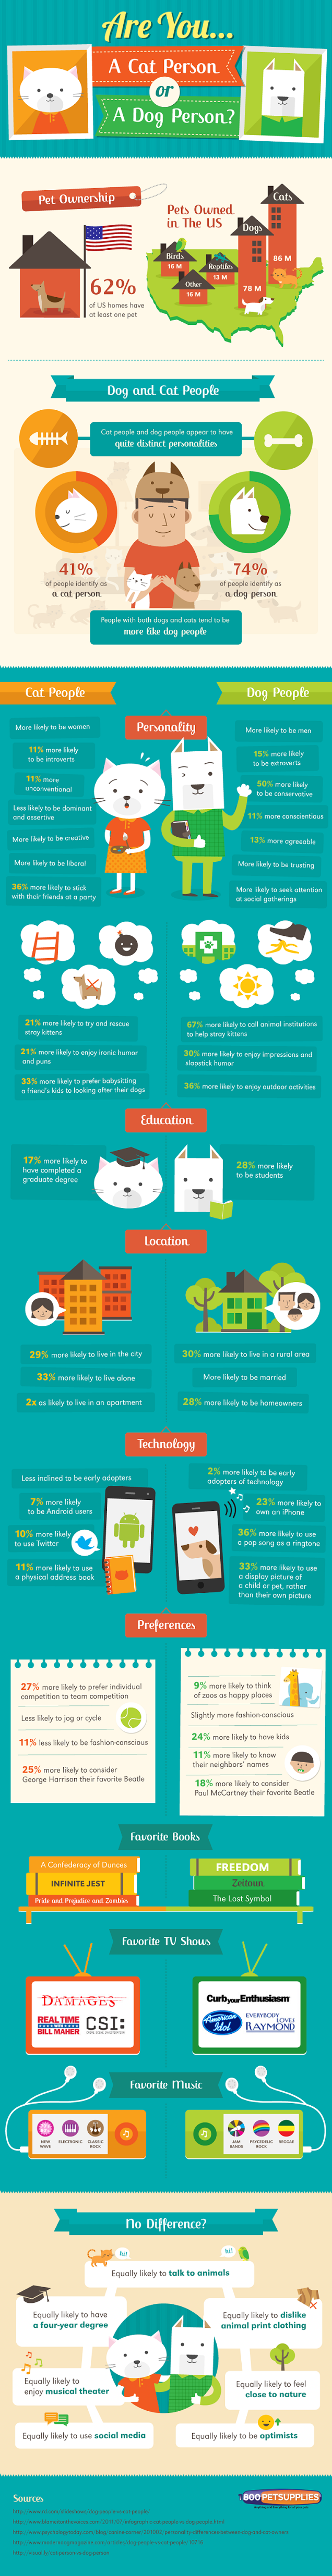 Are You a Cat Person Or a Dog Person? #infographic